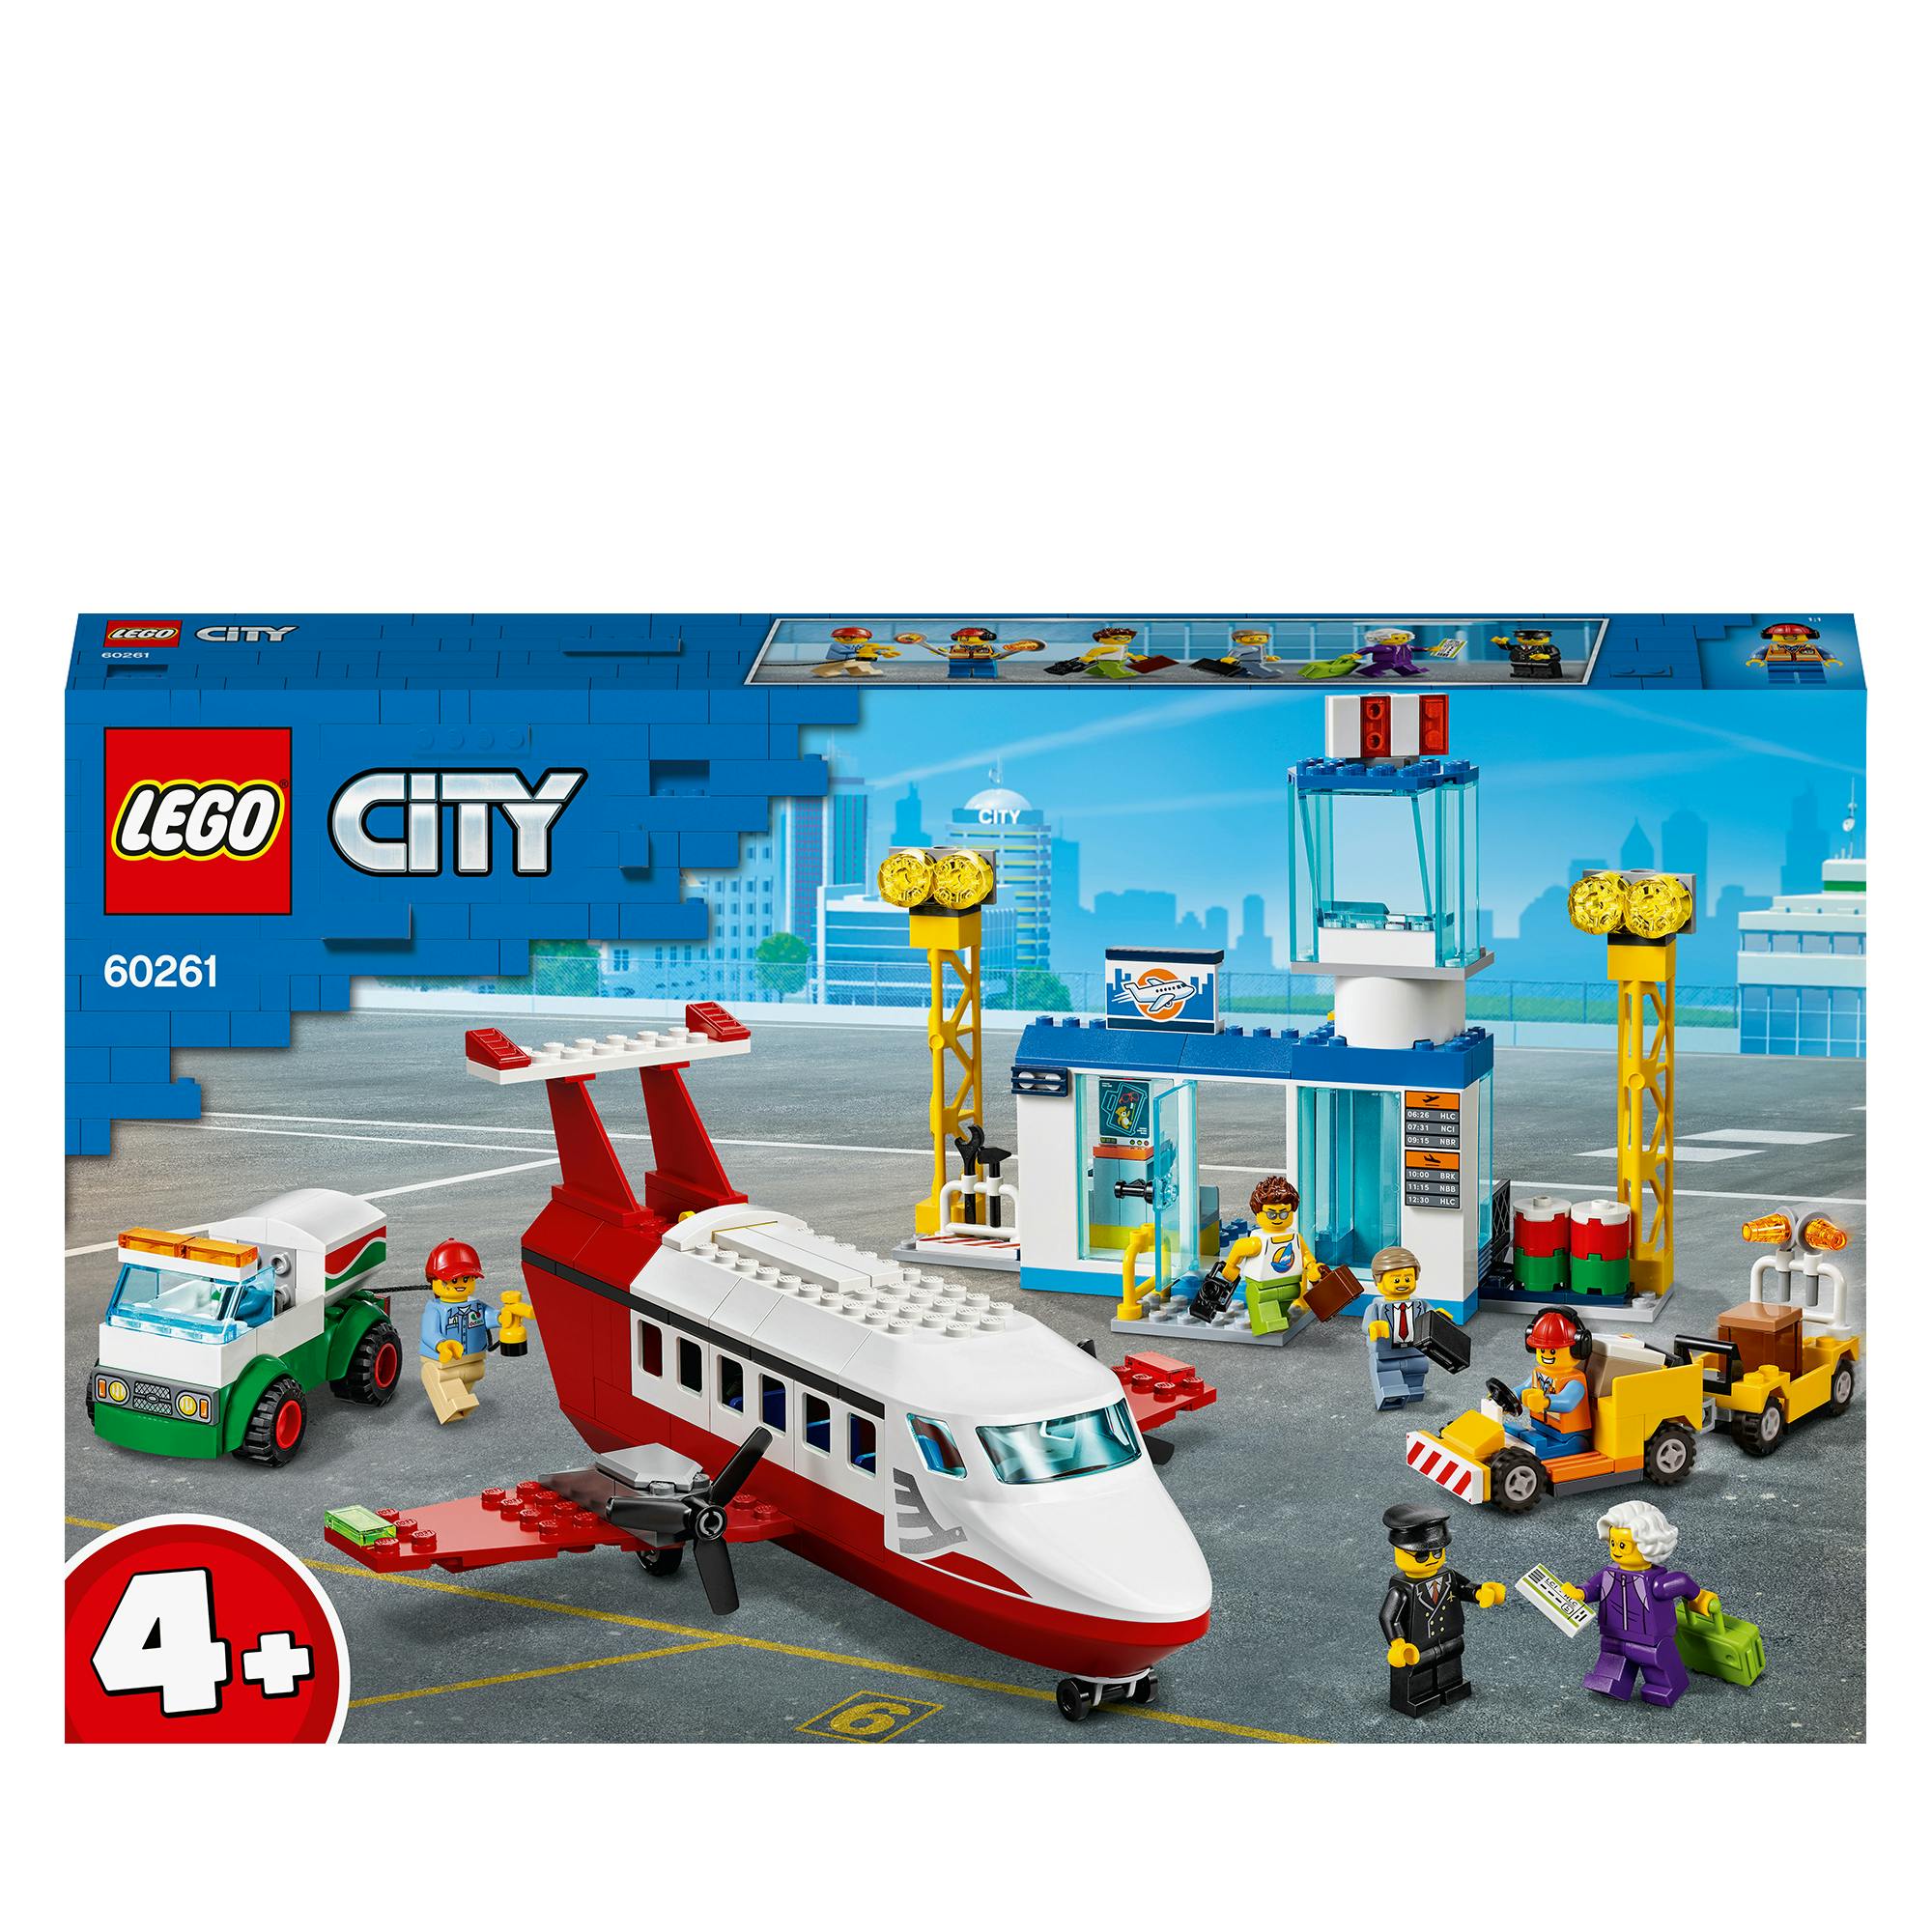 LEGO City Airport Centrale Luchthaven (60261)